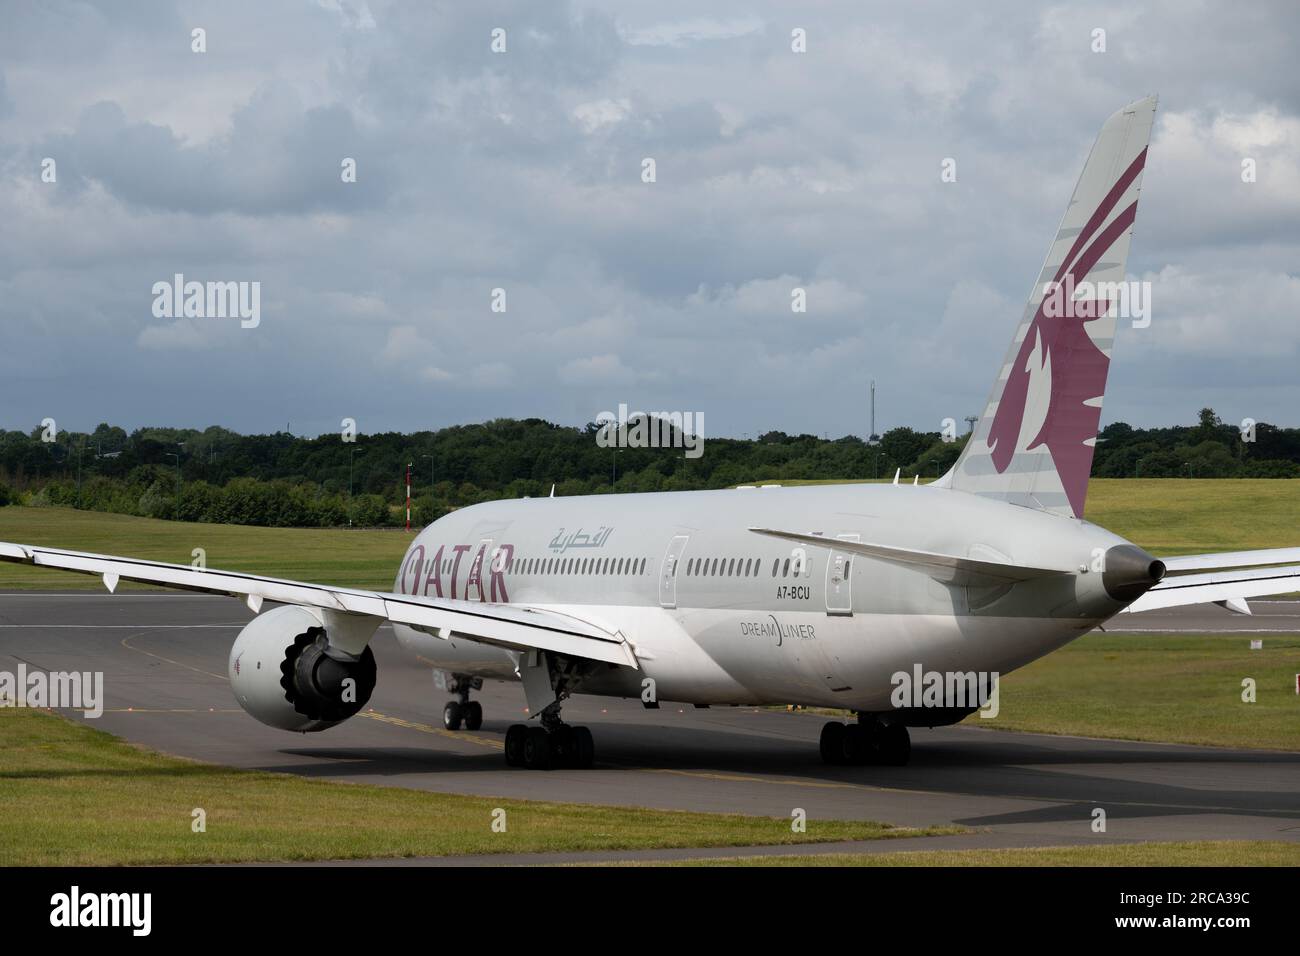 Qatar Airways Boeing 787-8 Dreamliner taxiing for take off at Birmingham Airport, UK (A7-BCU) Stock Photo